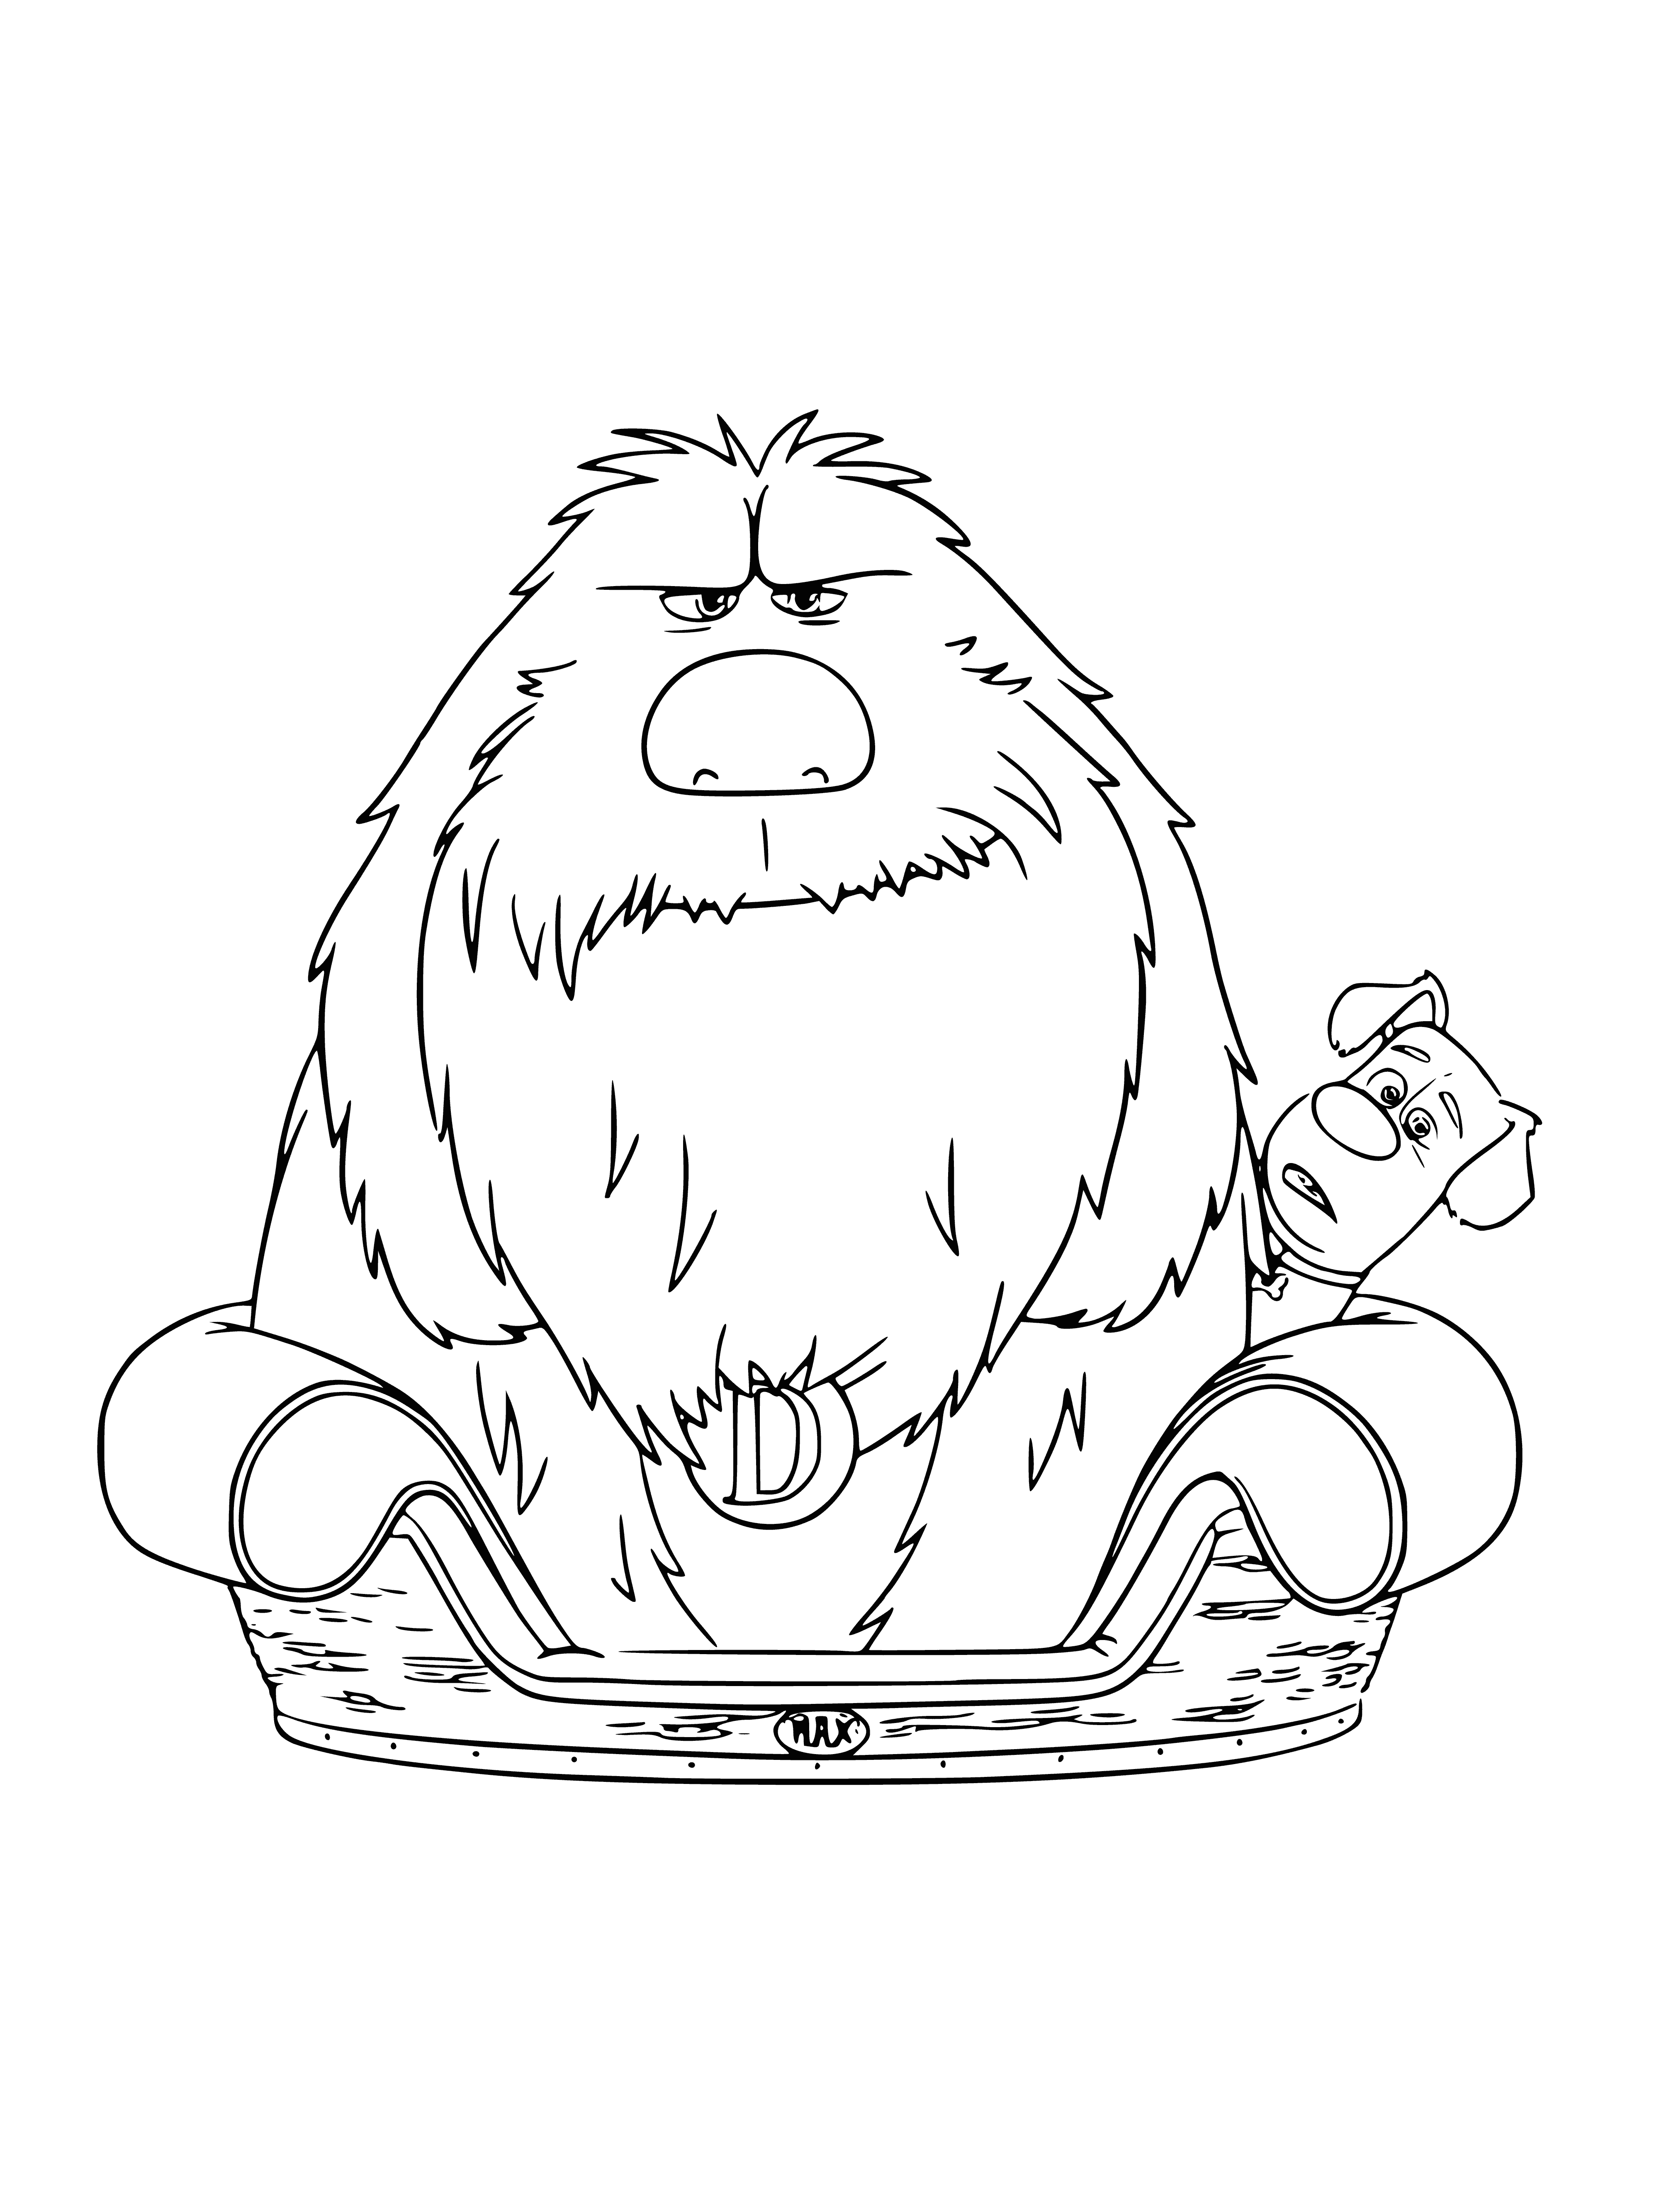 Duke and Max coloring page